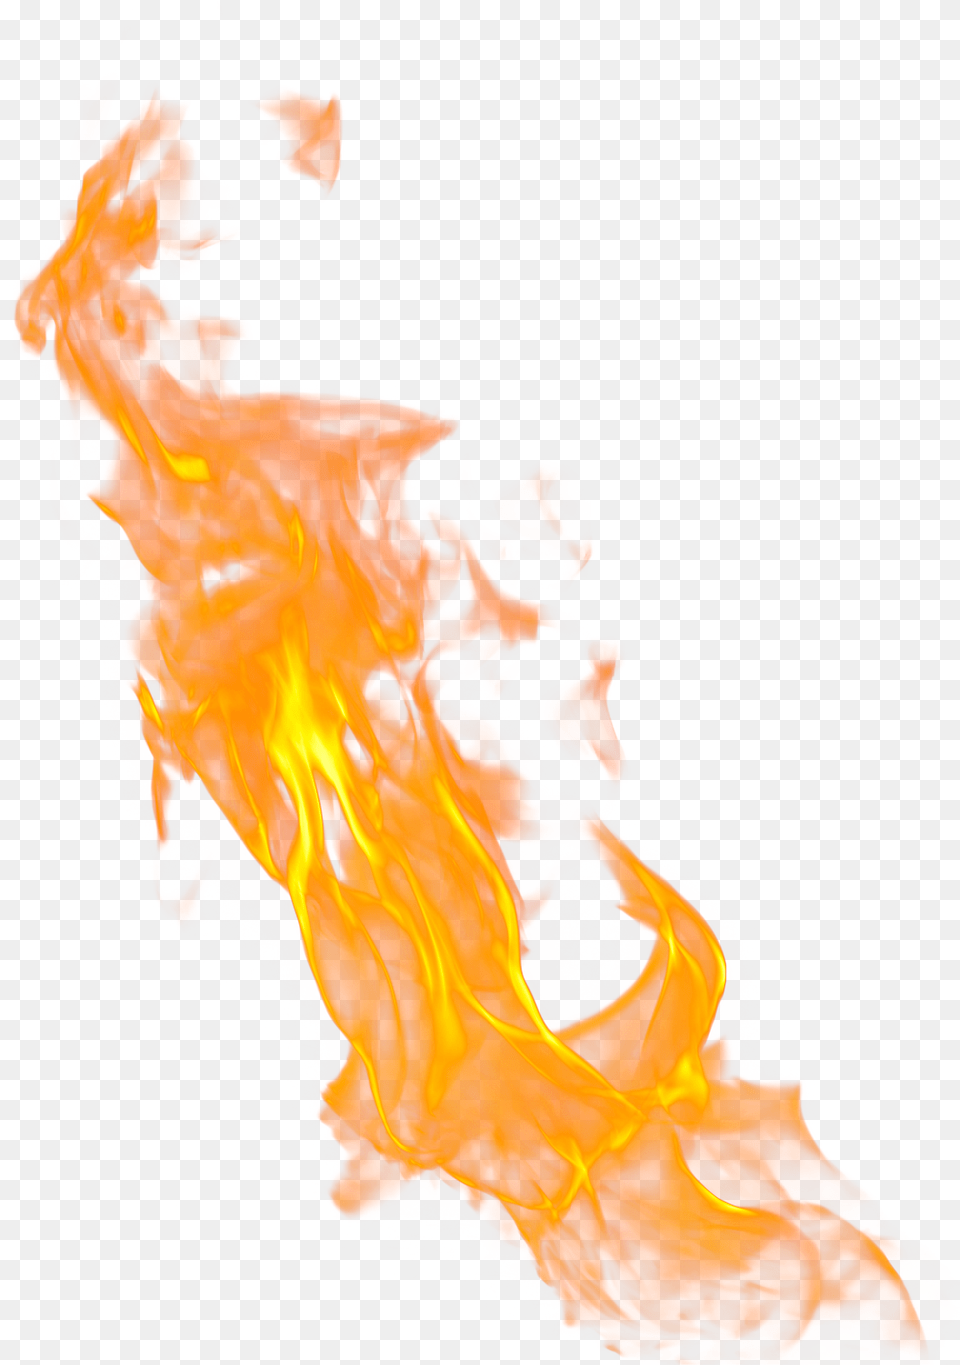 Where Is Fire Lighter Flame, Mountain, Nature, Outdoors, Adult Png Image